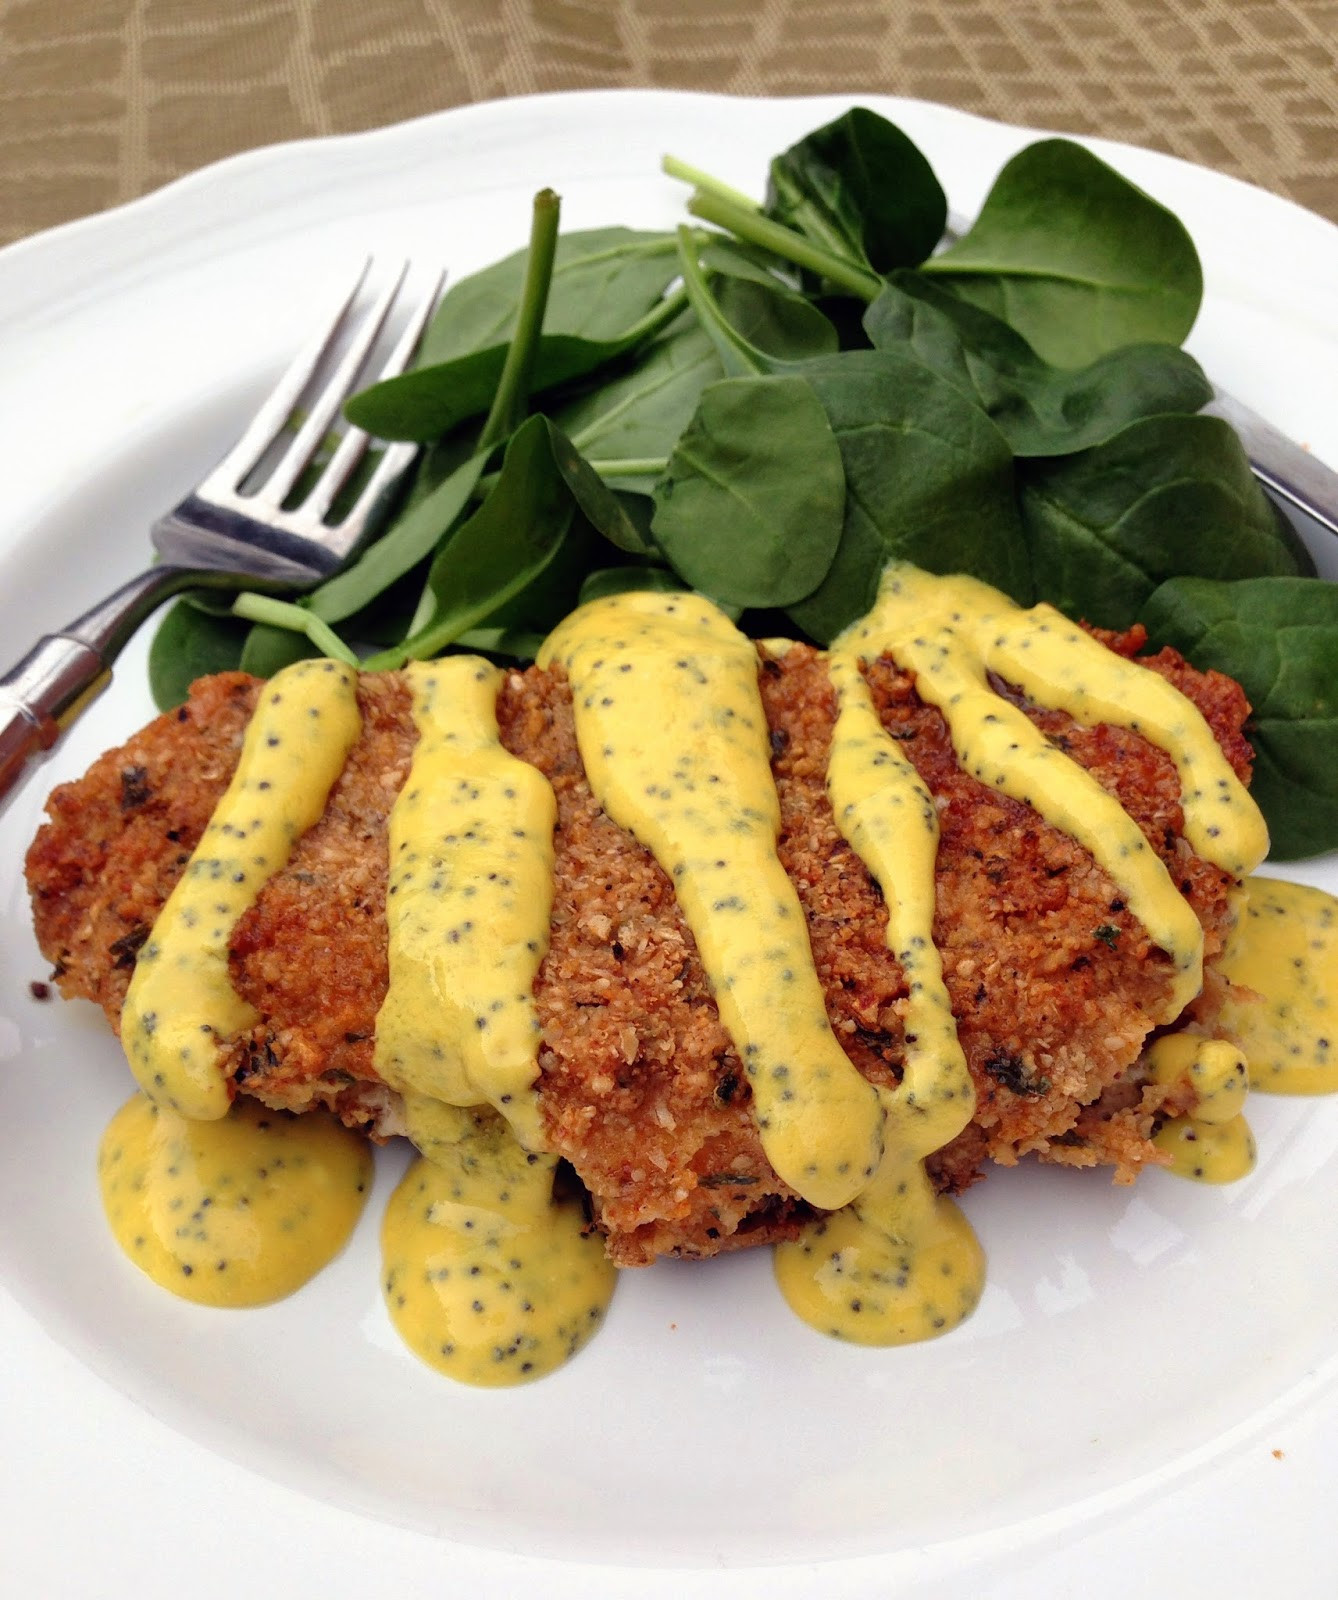 Healthy Pan Fried Chicken
 taylor made healthy pan "fried" chicken with poppyseed